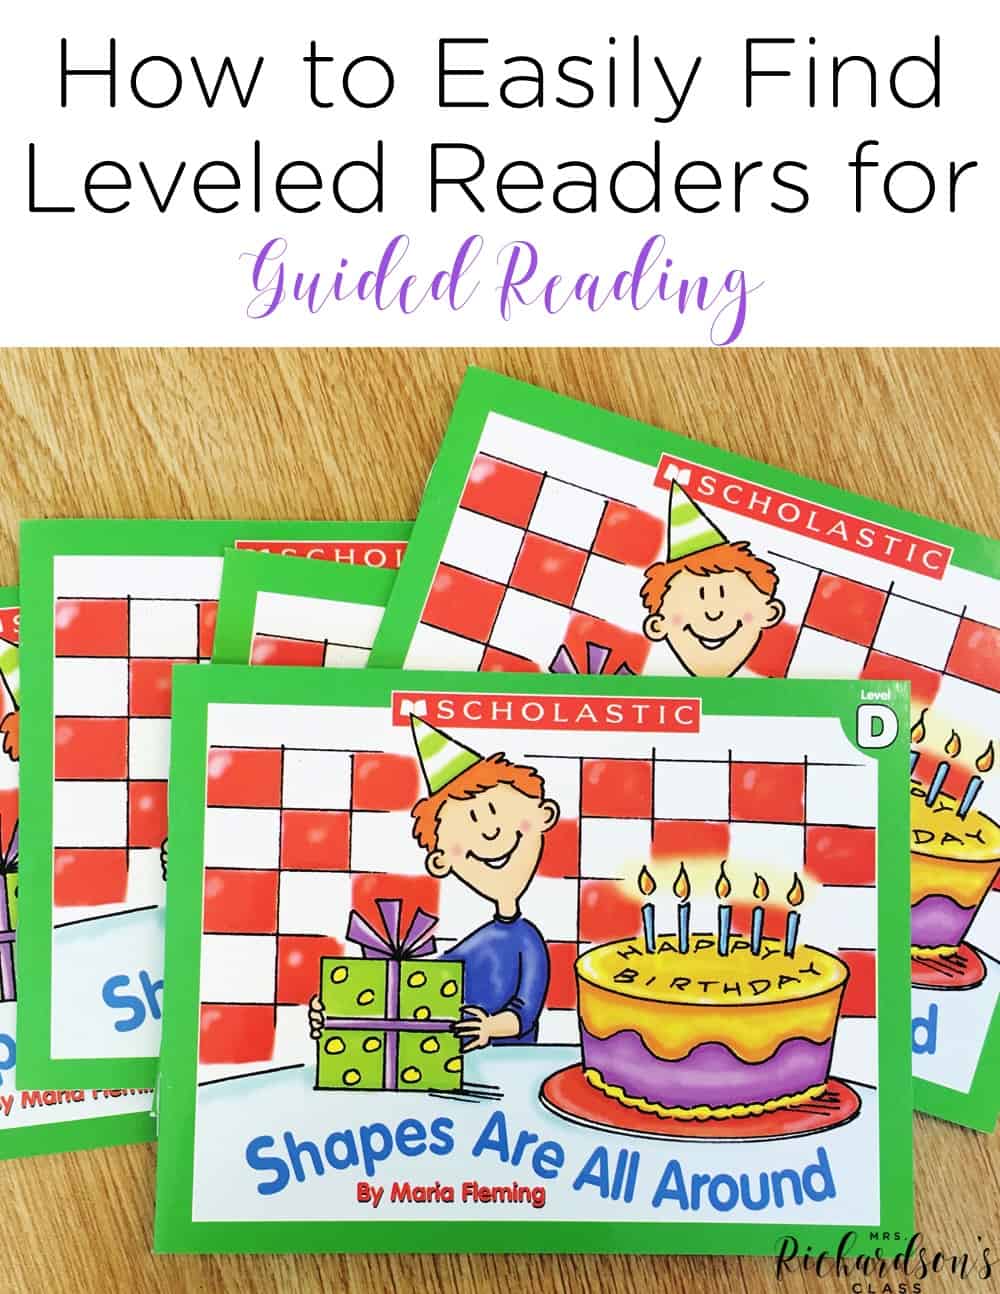 Are you ready to being guided reading but not sure where to find the right books? This blog post makes finding books EASY for you and shows you different places to get books for guided reading. You are sure to be set for your guided reading time with your kindergarten and first grade class after this!